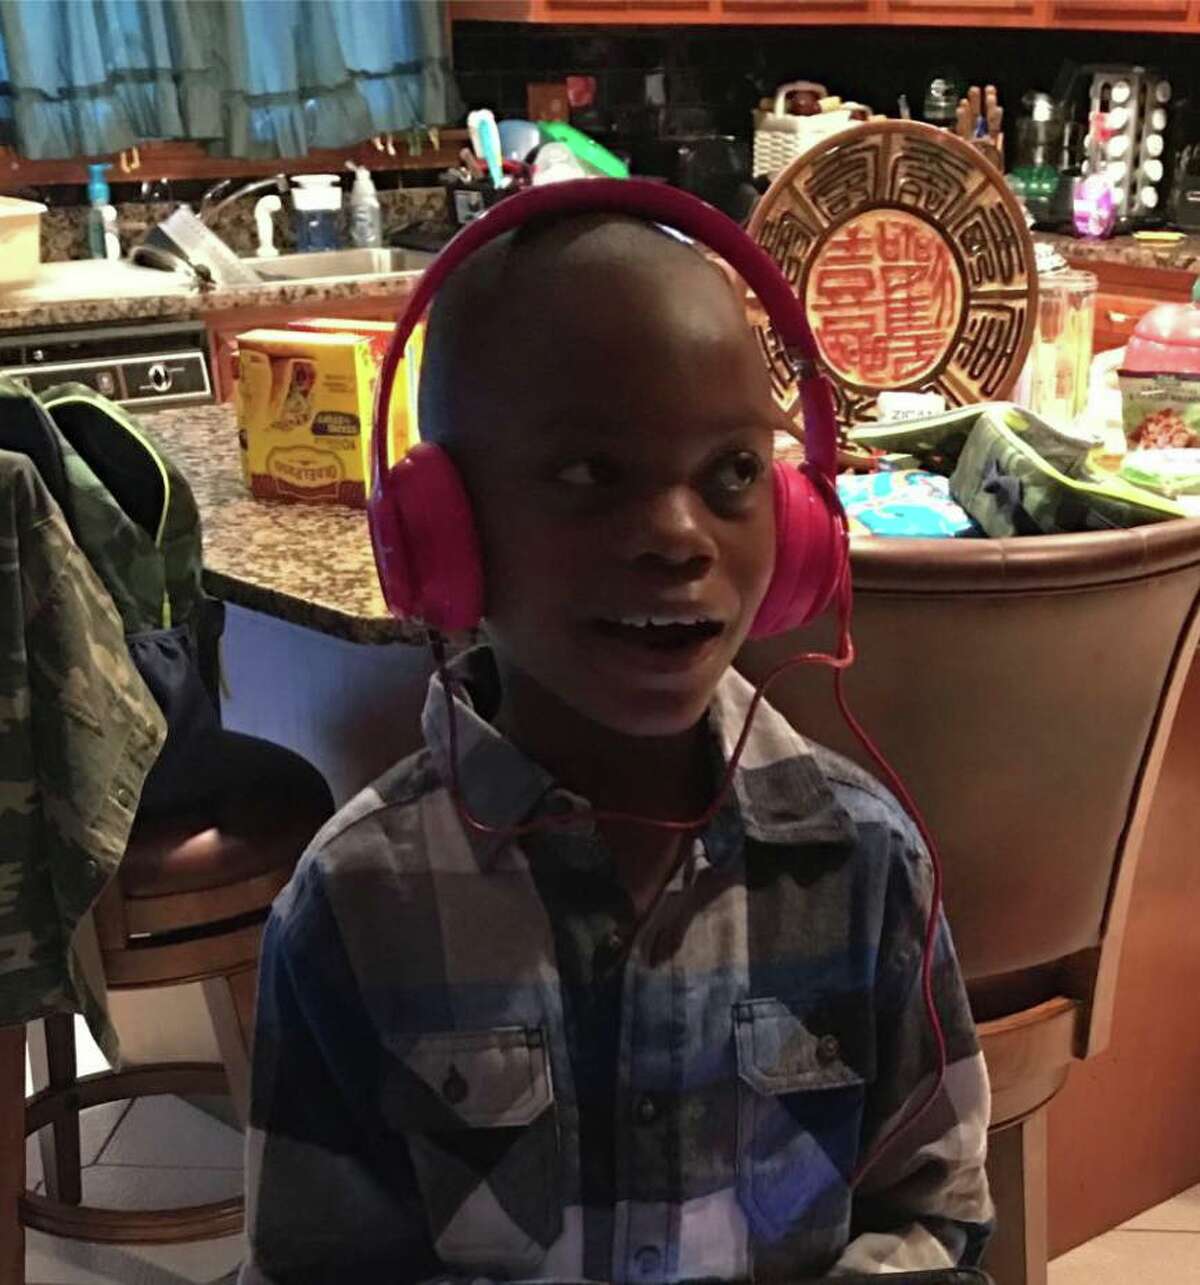 Pearland Police officers are asking for help in locating a missing 9-year-old autistic child named Marcus.